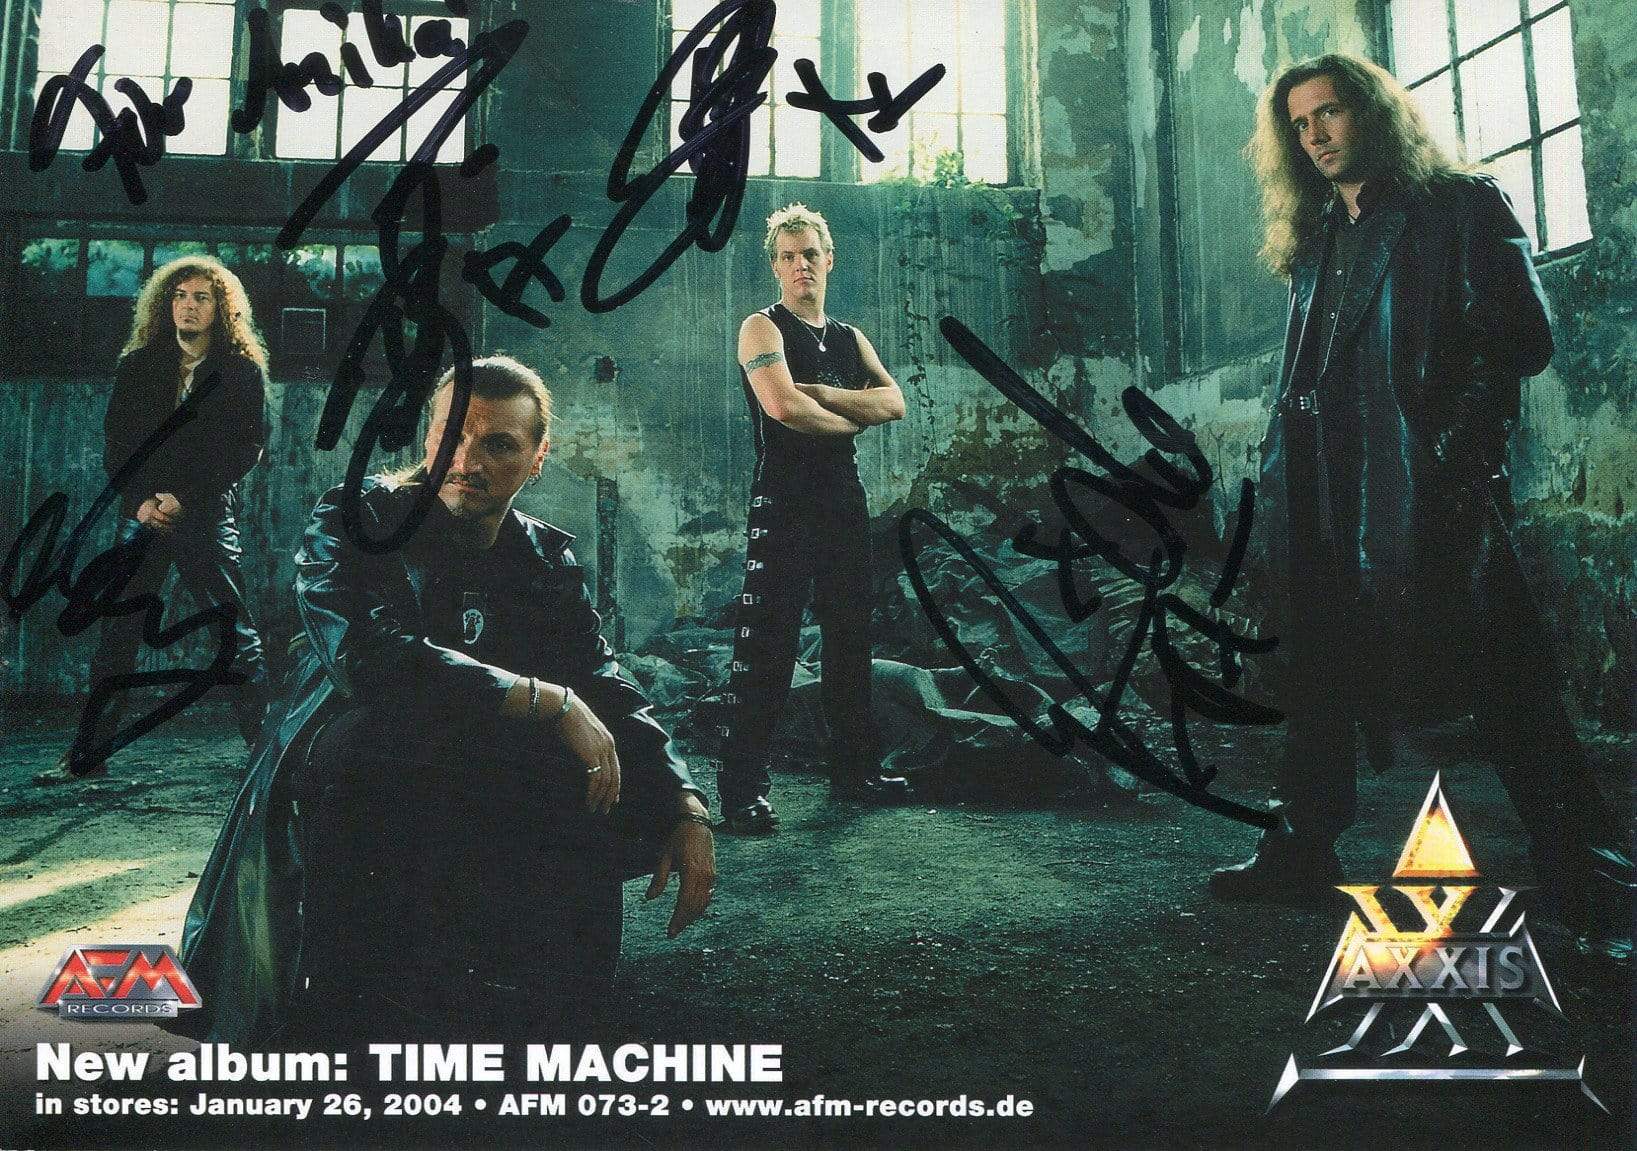 AXXIS autograph